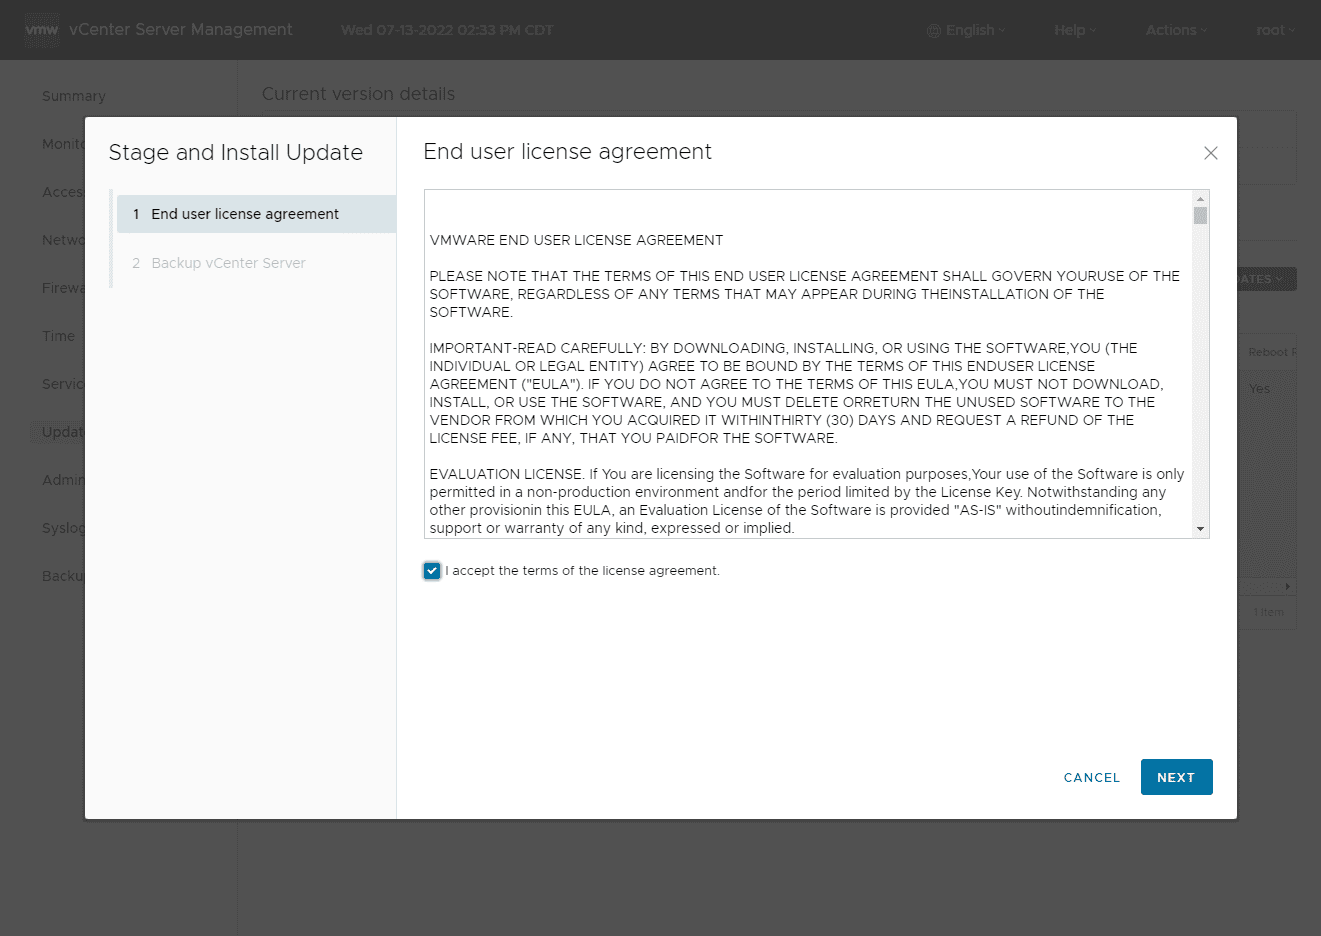 Accept the EULA for the vCenter Server update